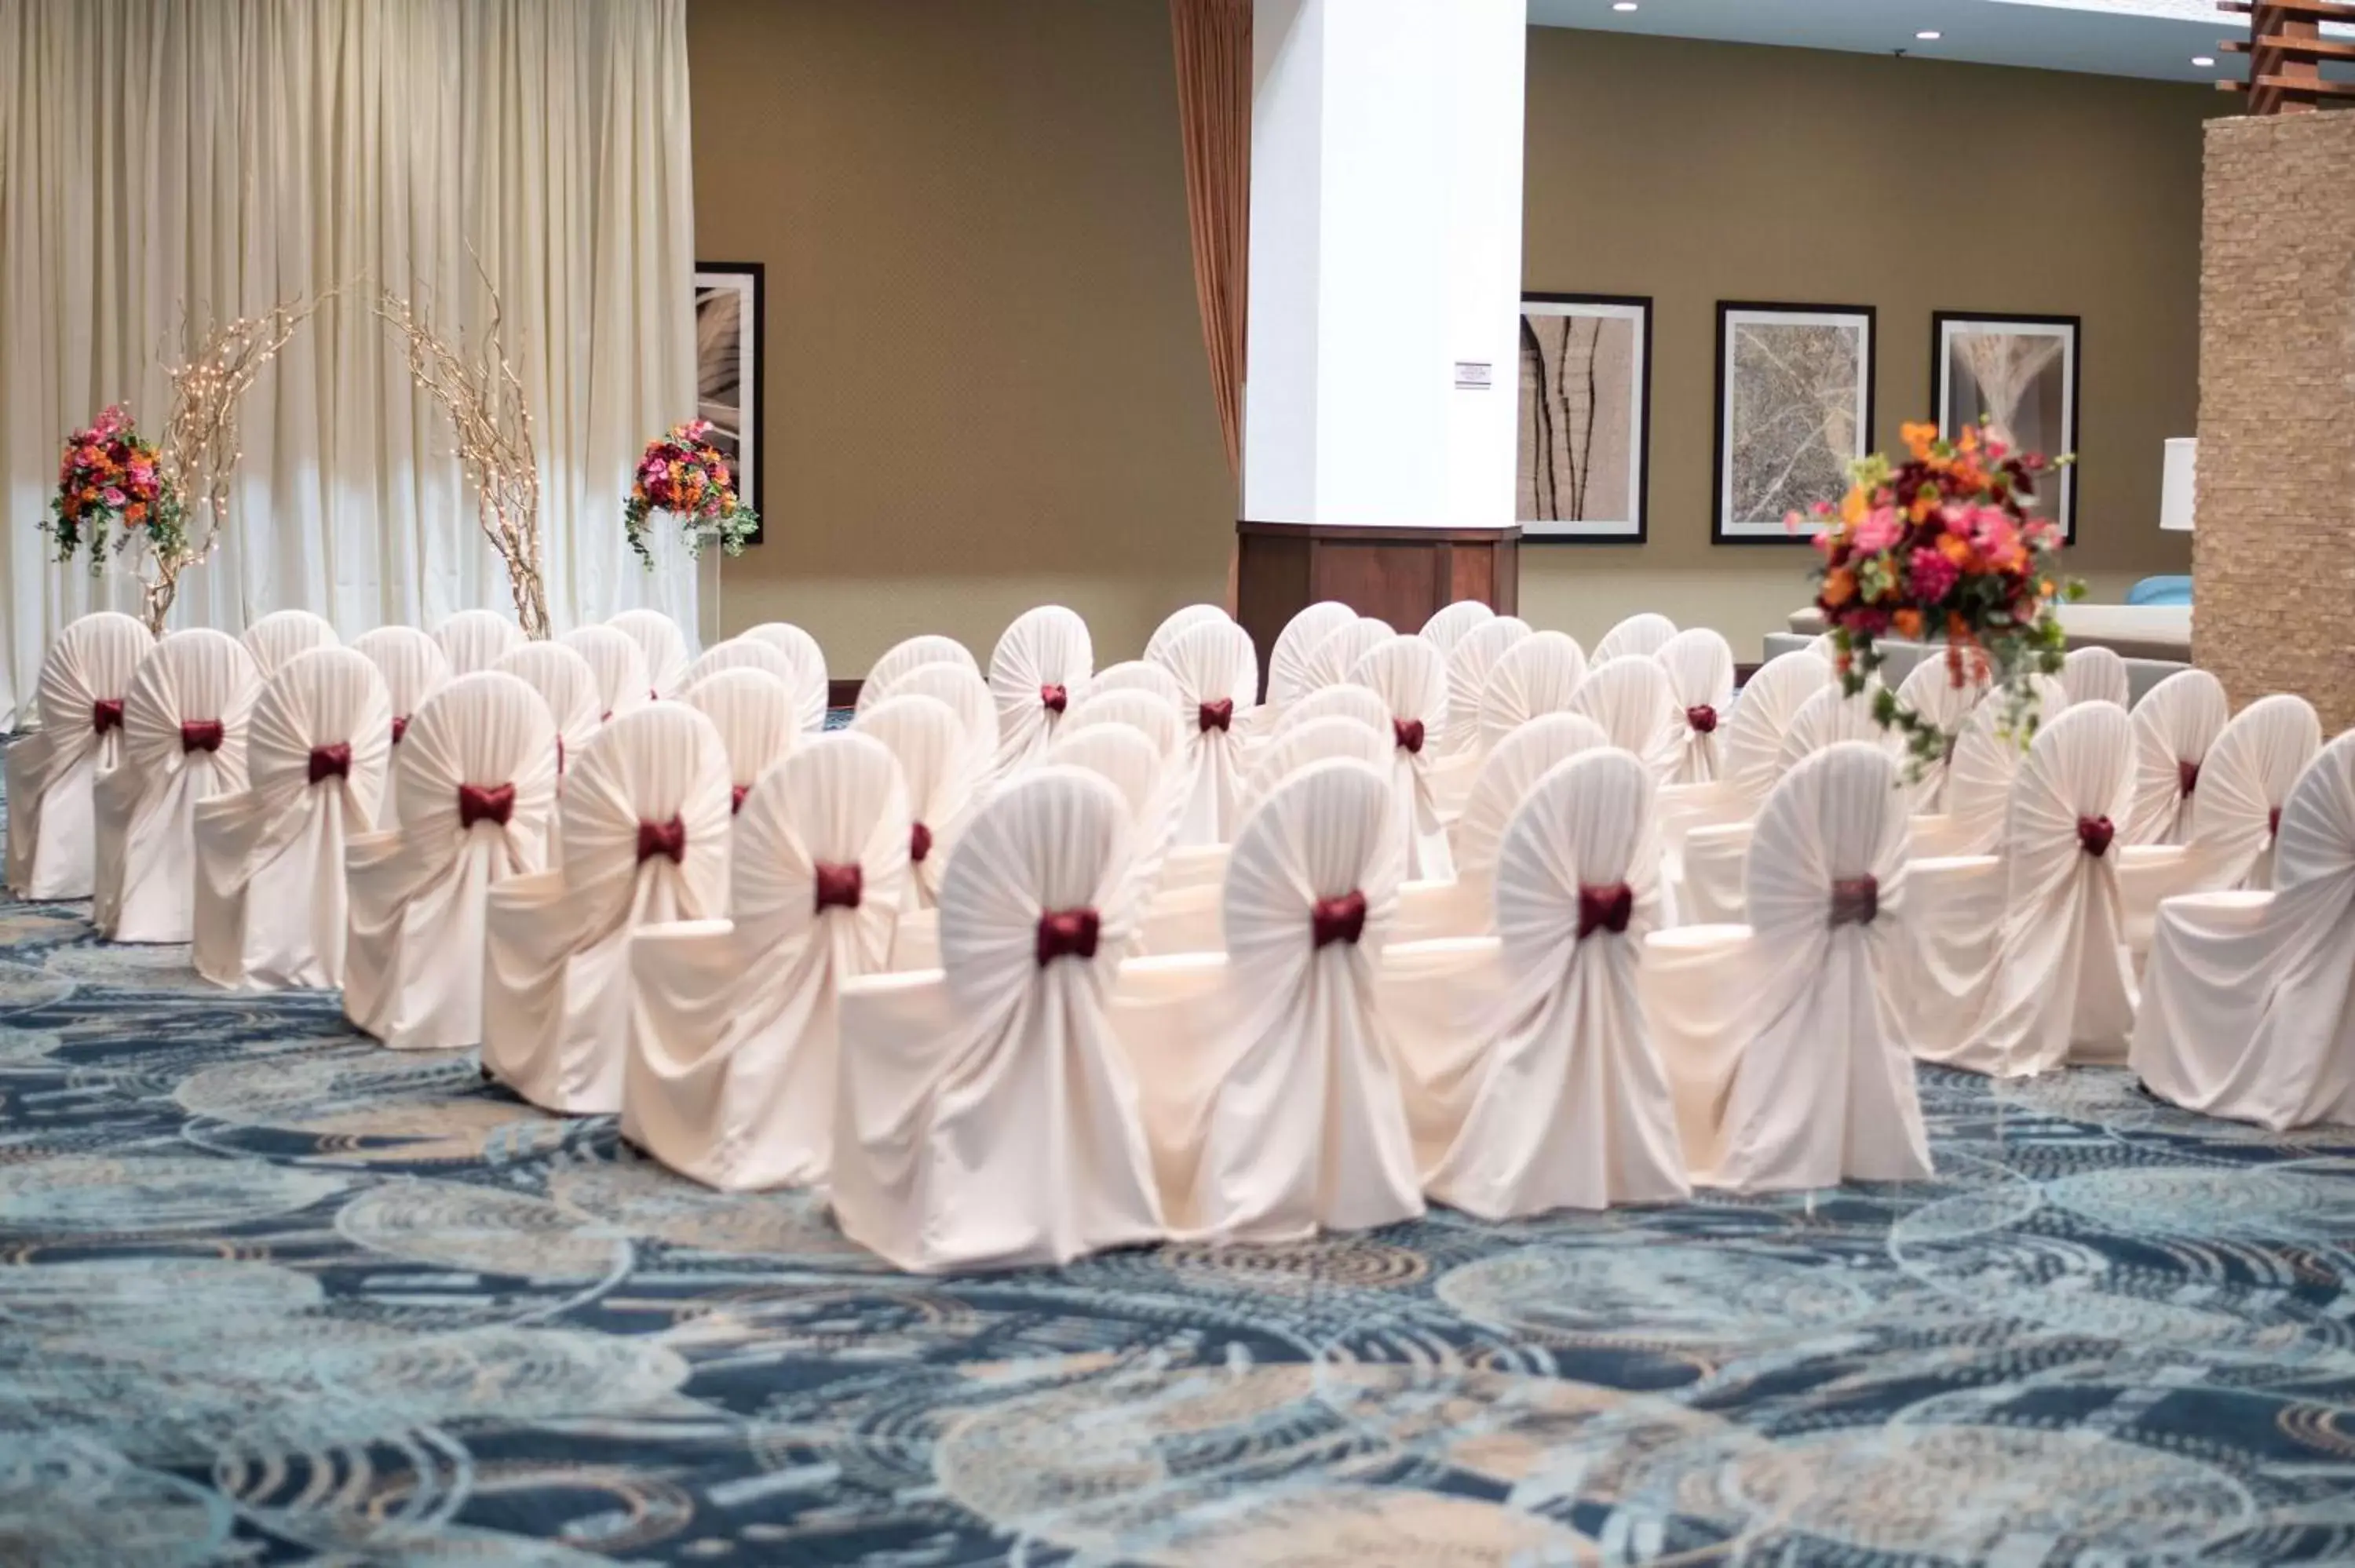 Meeting/conference room, Banquet Facilities in Doubletree by Hilton Phoenix Mesa